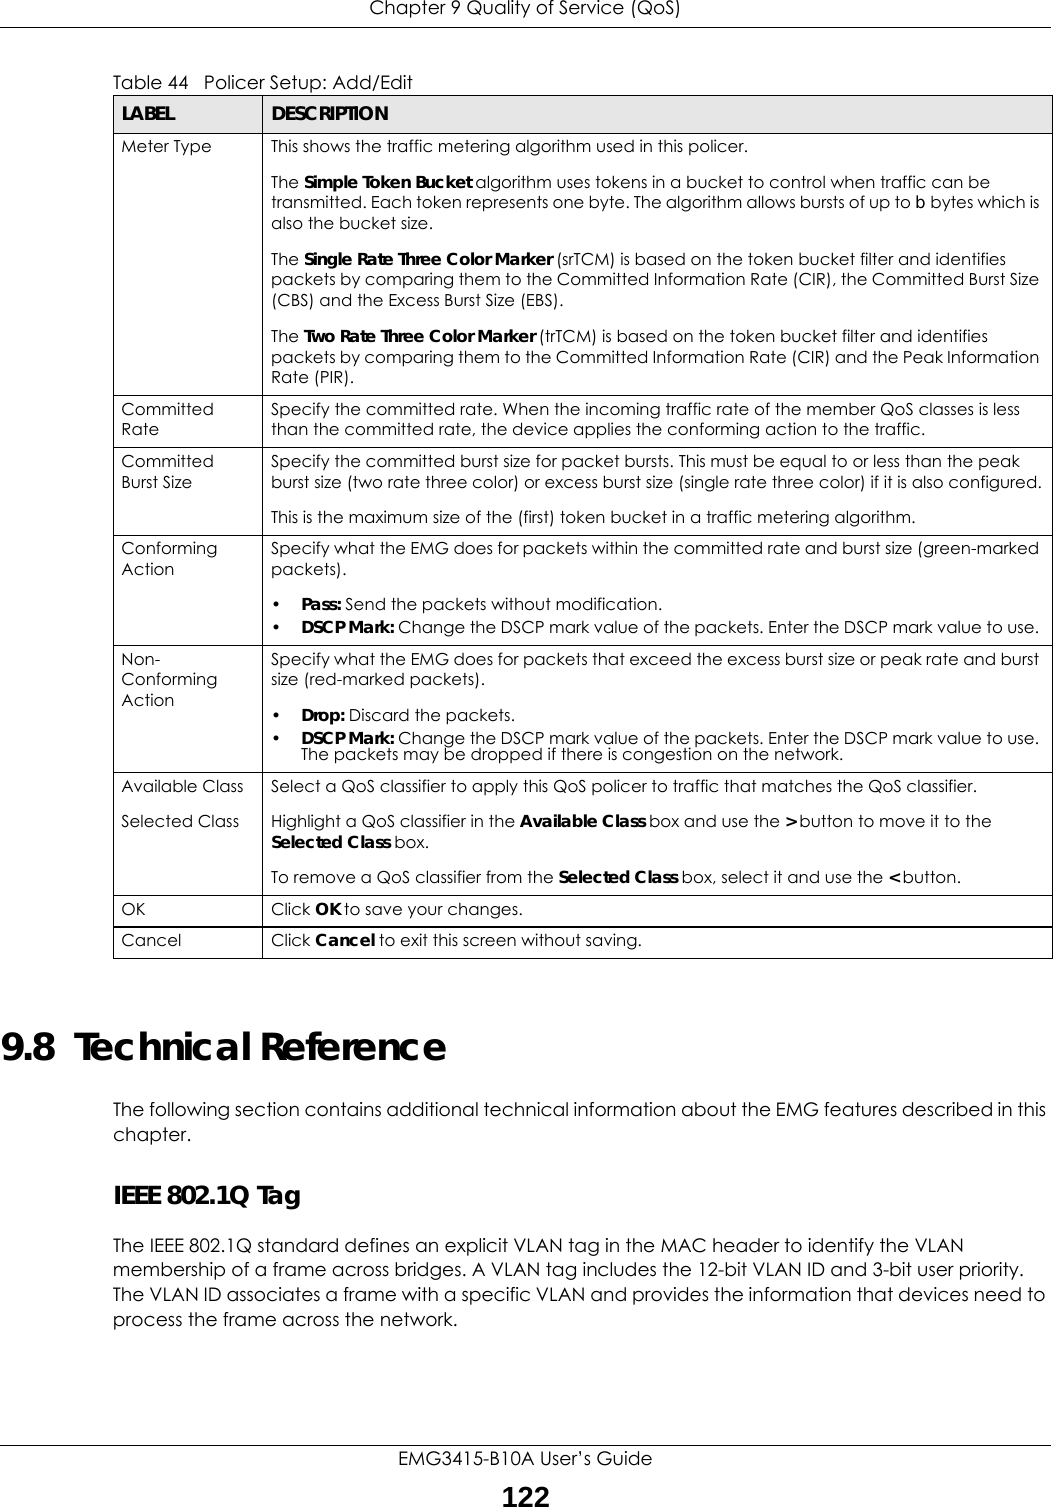 Chapter 9 Quality of Service (QoS)EMG3415-B10A User’s Guide1229.8  Technical ReferenceThe following section contains additional technical information about the EMG features described in this chapter.IEEE 802.1Q TagThe IEEE 802.1Q standard defines an explicit VLAN tag in the MAC header to identify the VLAN membership of a frame across bridges. A VLAN tag includes the 12-bit VLAN ID and 3-bit user priority. The VLAN ID associates a frame with a specific VLAN and provides the information that devices need to process the frame across the network. Meter Type This shows the traffic metering algorithm used in this policer.The Simple Token Bucket algorithm uses tokens in a bucket to control when traffic can be transmitted. Each token represents one byte. The algorithm allows bursts of up to b bytes which is also the bucket size.The Single Rate Three Color Marker (srTCM) is based on the token bucket filter and identifies packets by comparing them to the Committed Information Rate (CIR), the Committed Burst Size (CBS) and the Excess Burst Size (EBS).The Two Rate Three Color Marker (trTCM) is based on the token bucket filter and identifies packets by comparing them to the Committed Information Rate (CIR) and the Peak Information Rate (PIR).Committed RateSpecify the committed rate. When the incoming traffic rate of the member QoS classes is less than the committed rate, the device applies the conforming action to the traffic.Committed Burst SizeSpecify the committed burst size for packet bursts. This must be equal to or less than the peak burst size (two rate three color) or excess burst size (single rate three color) if it is also configured.This is the maximum size of the (first) token bucket in a traffic metering algorithm.Conforming ActionSpecify what the EMG does for packets within the committed rate and burst size (green-marked packets). •Pass: Send the packets without modification.•DSCP Mark: Change the DSCP mark value of the packets. Enter the DSCP mark value to use. Non-Conforming ActionSpecify what the EMG does for packets that exceed the excess burst size or peak rate and burst size (red-marked packets). •Drop: Discard the packets.•DSCP Mark: Change the DSCP mark value of the packets. Enter the DSCP mark value to use. The packets may be dropped if there is congestion on the network.Available ClassSelected Class Select a QoS classifier to apply this QoS policer to traffic that matches the QoS classifier.Highlight a QoS classifier in the Available Class box and use the &gt; button to move it to the Selected Class box.To remove a QoS classifier from the Selected Class box, select it and use the &lt; button.OK Click OK to save your changes.Cancel Click Cancel to exit this screen without saving.Table 44   Policer Setup: Add/EditLABEL DESCRIPTION